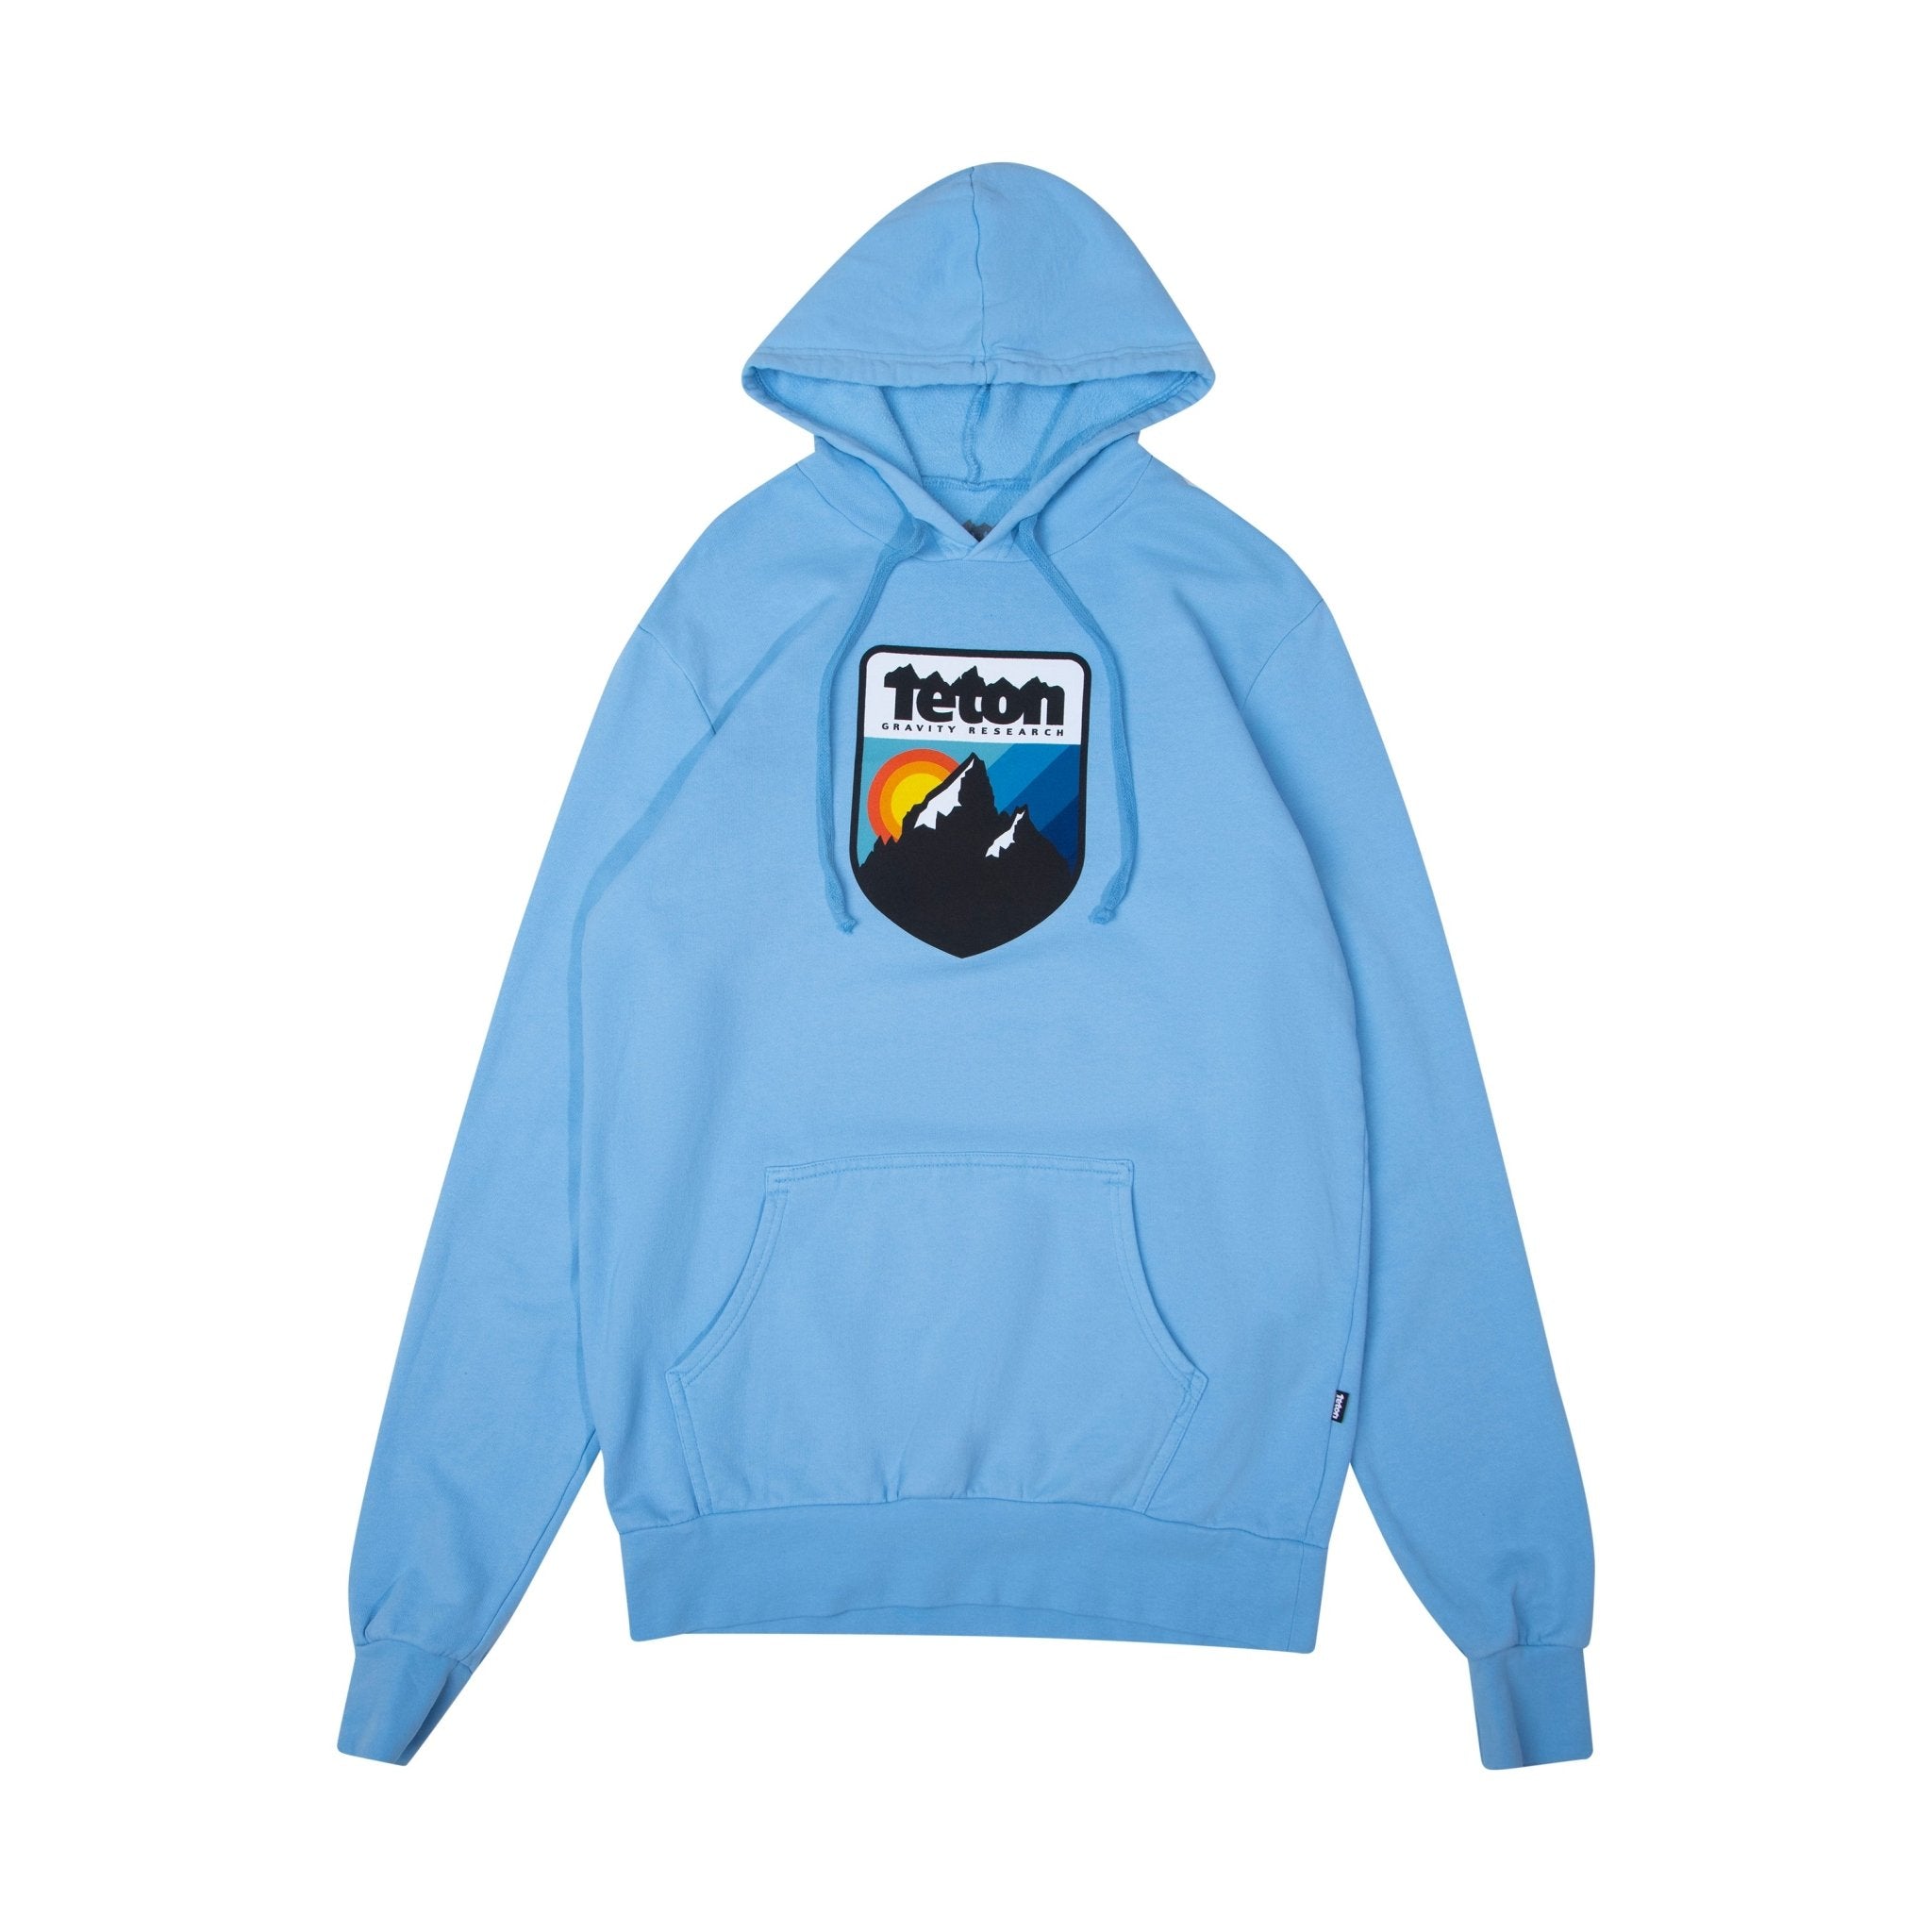 Retro Camp Hoodie 2.0 - Teton Gravity Research. Blue colored sweatshirt with Teton Gravity Research logo with mountains and colorful sunset. #color_baby blue